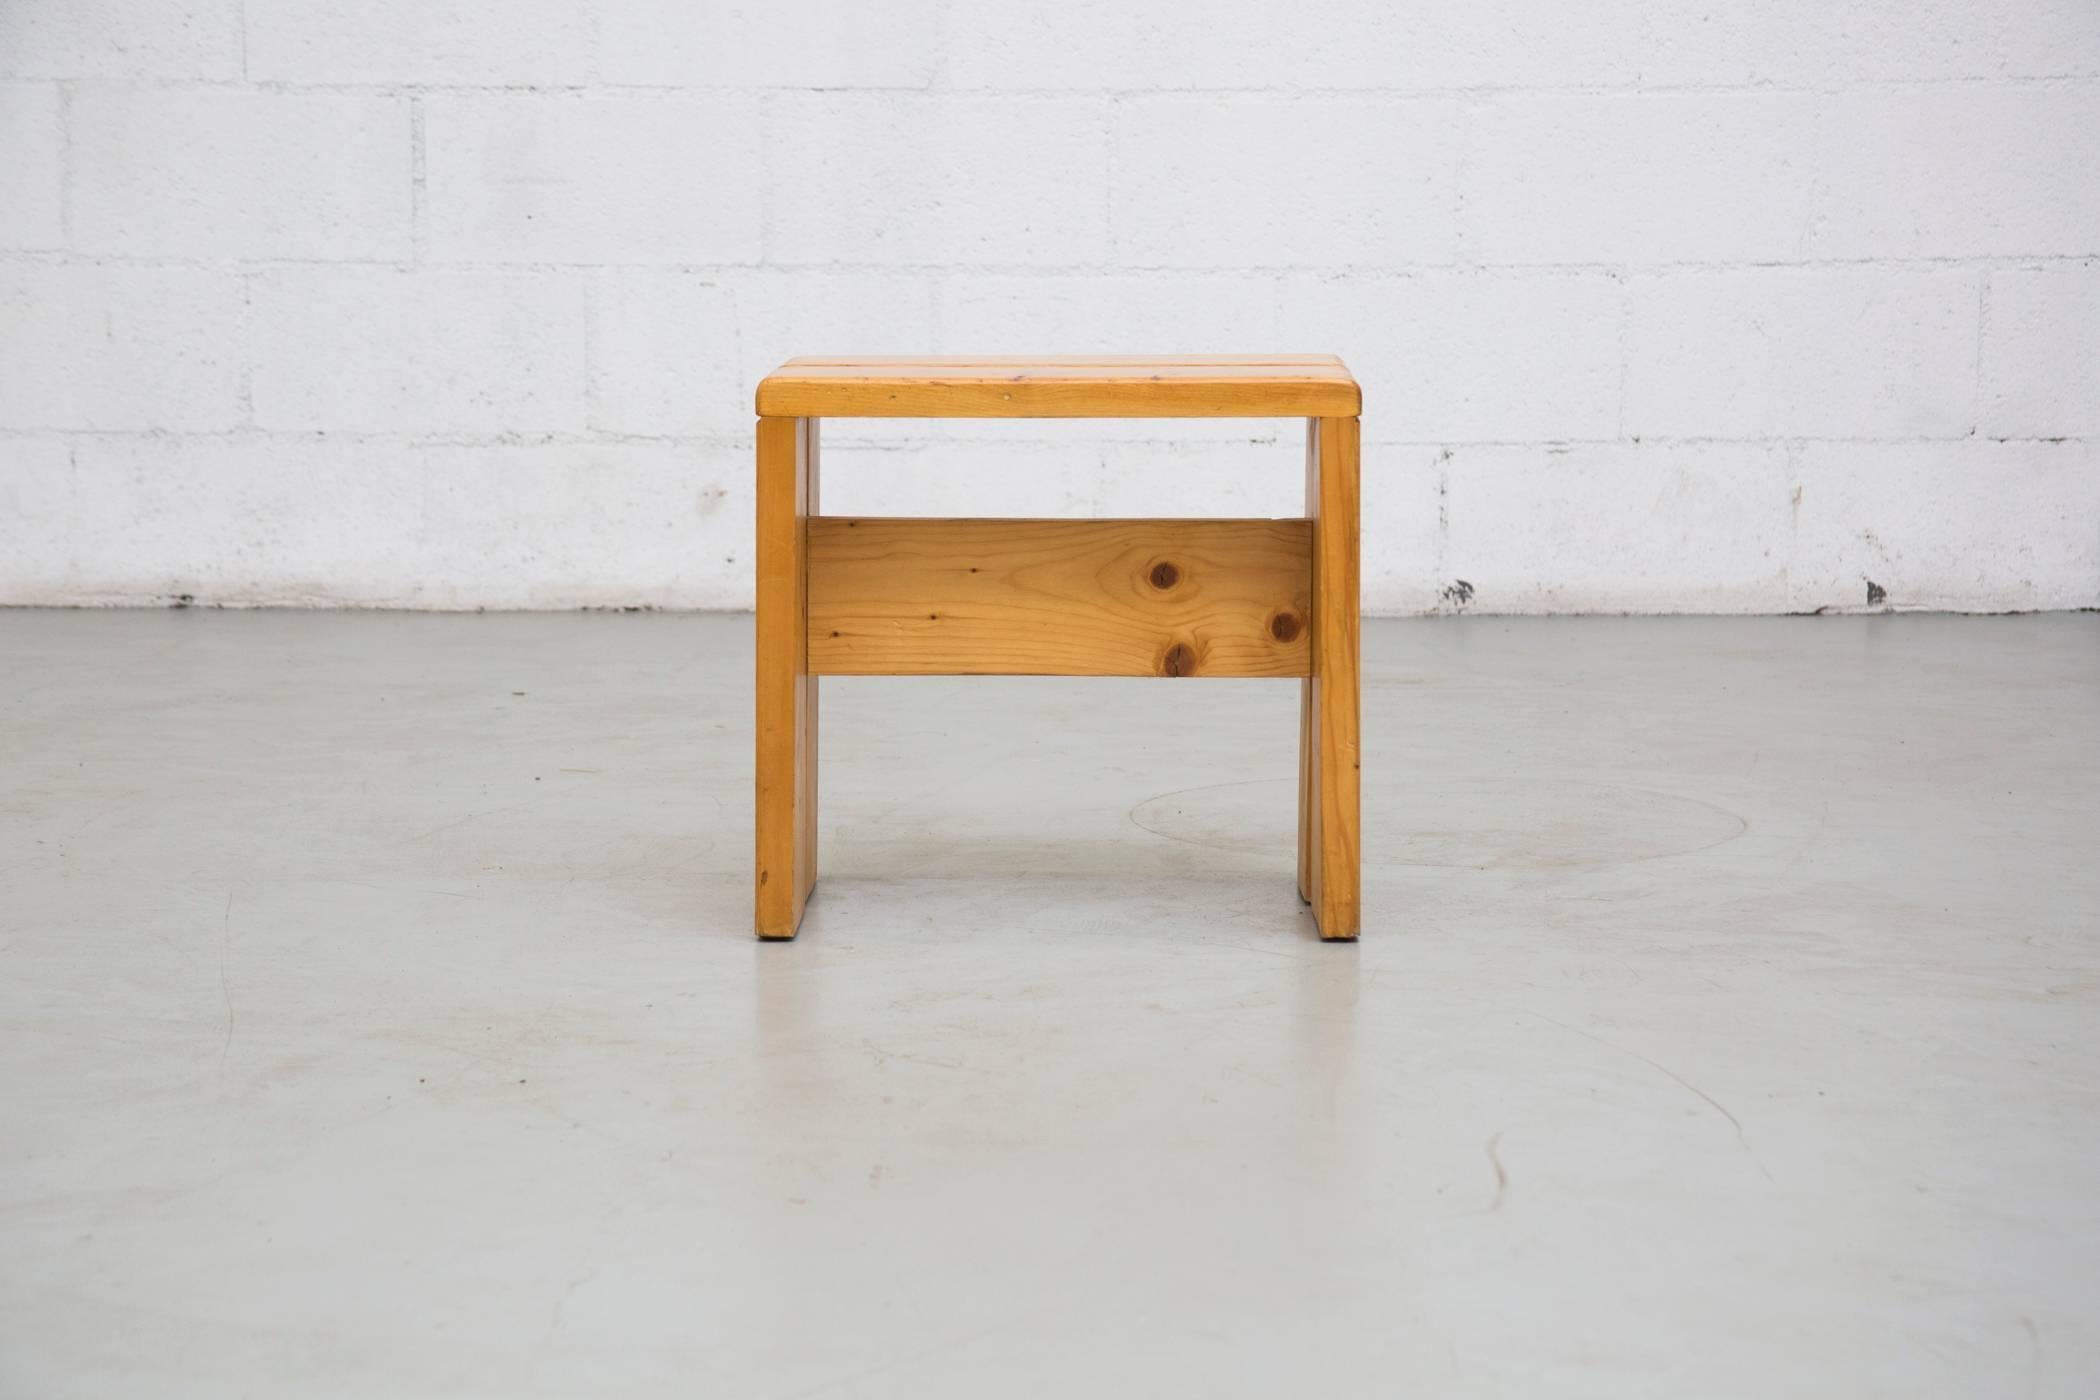 Charlotte Perriand solid pine stool from Les Arcs, France, circa 1968. In good original condition with some wear to surface consistent with age and use.